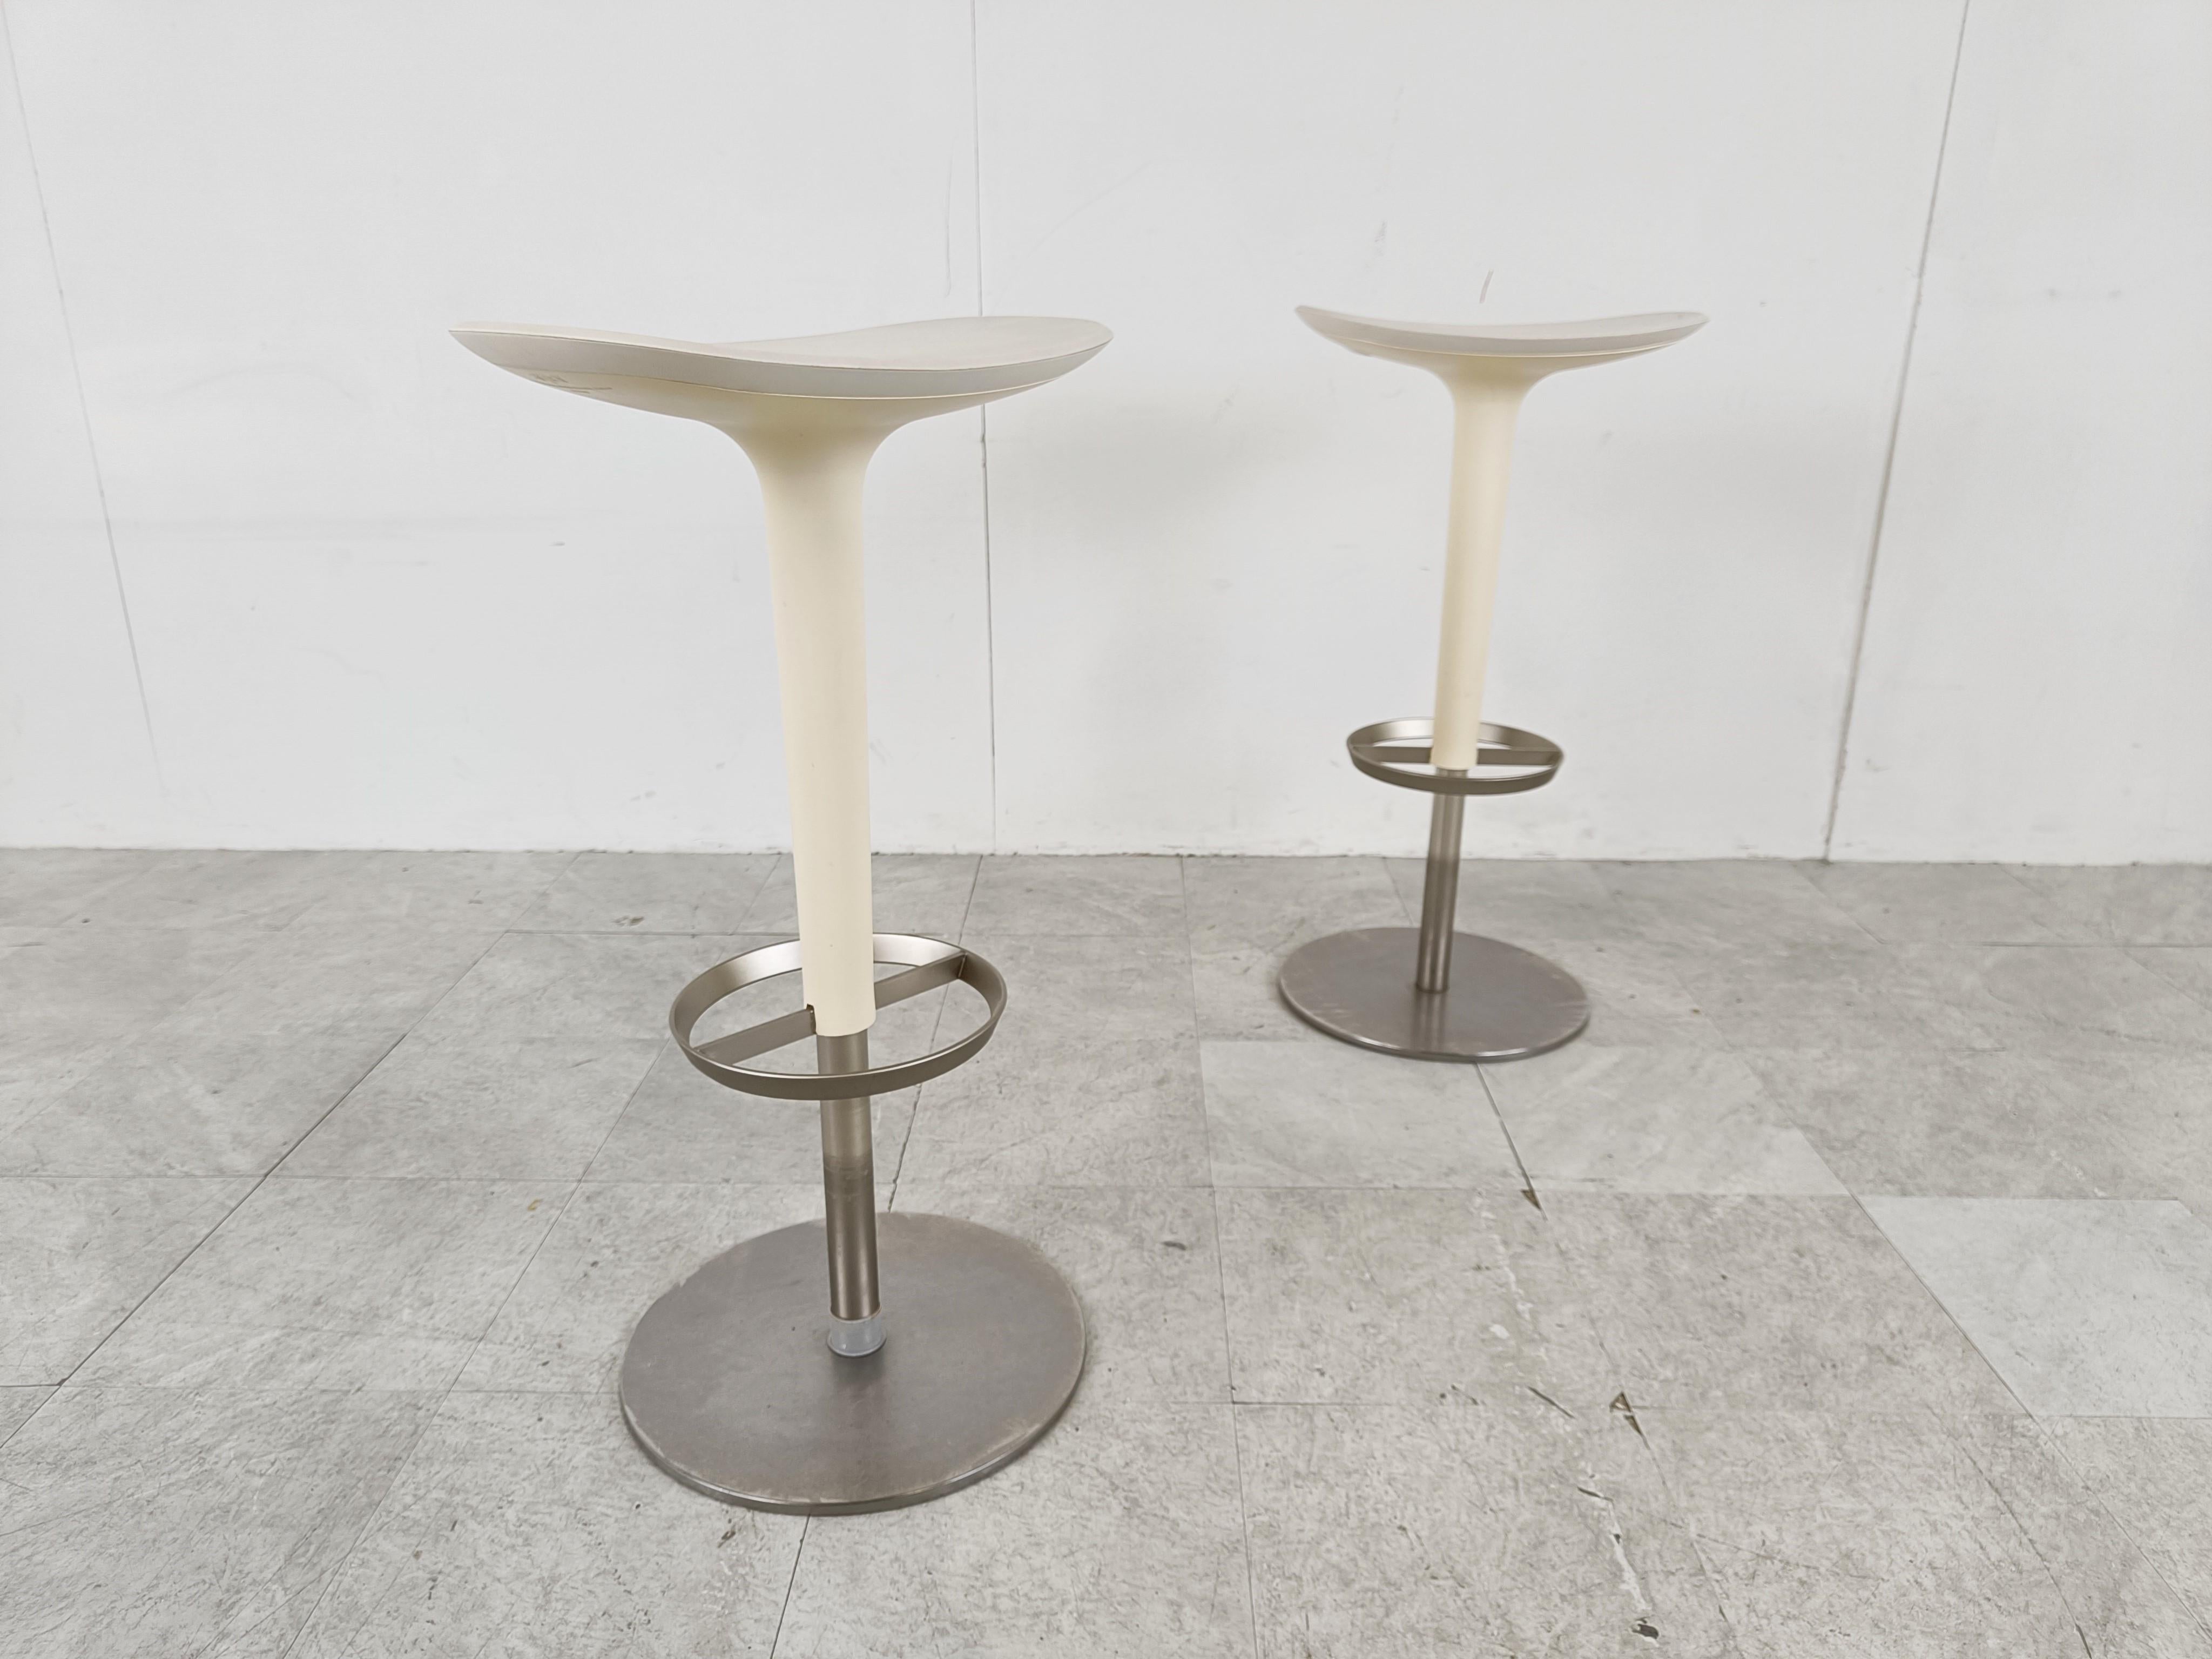 White bar stools by arper Italy.

Rings that serve as footrest and a round aluminum base.

Beautiful timeless design.

Dimensions: 
Height: 71cm/27.95